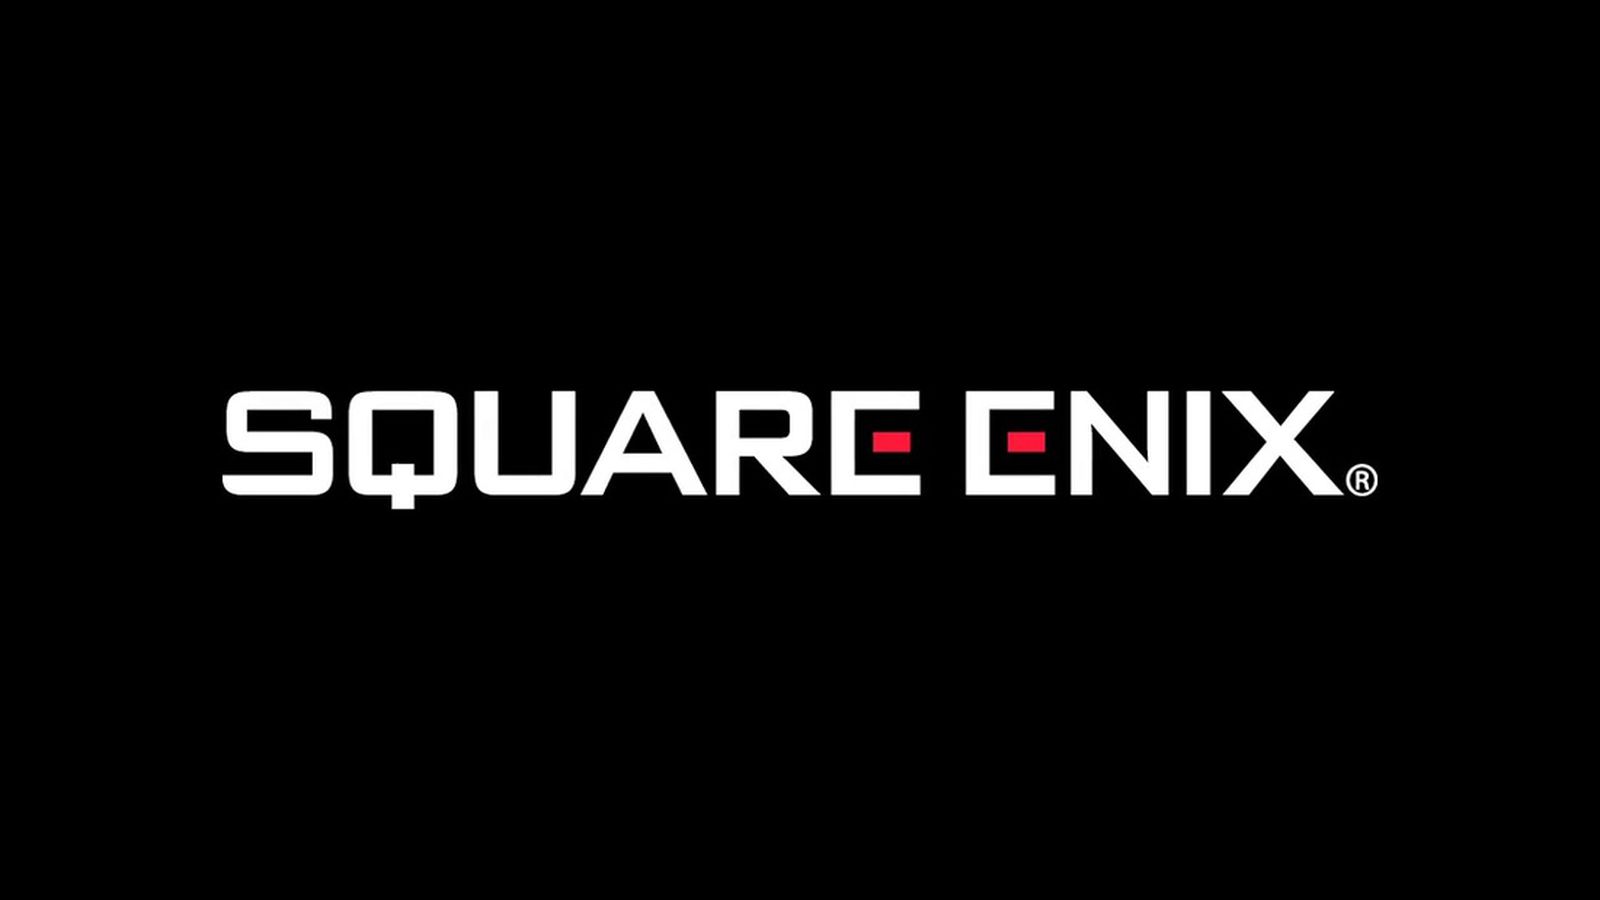 Square Enix – Engage Kill trademarked in Japan